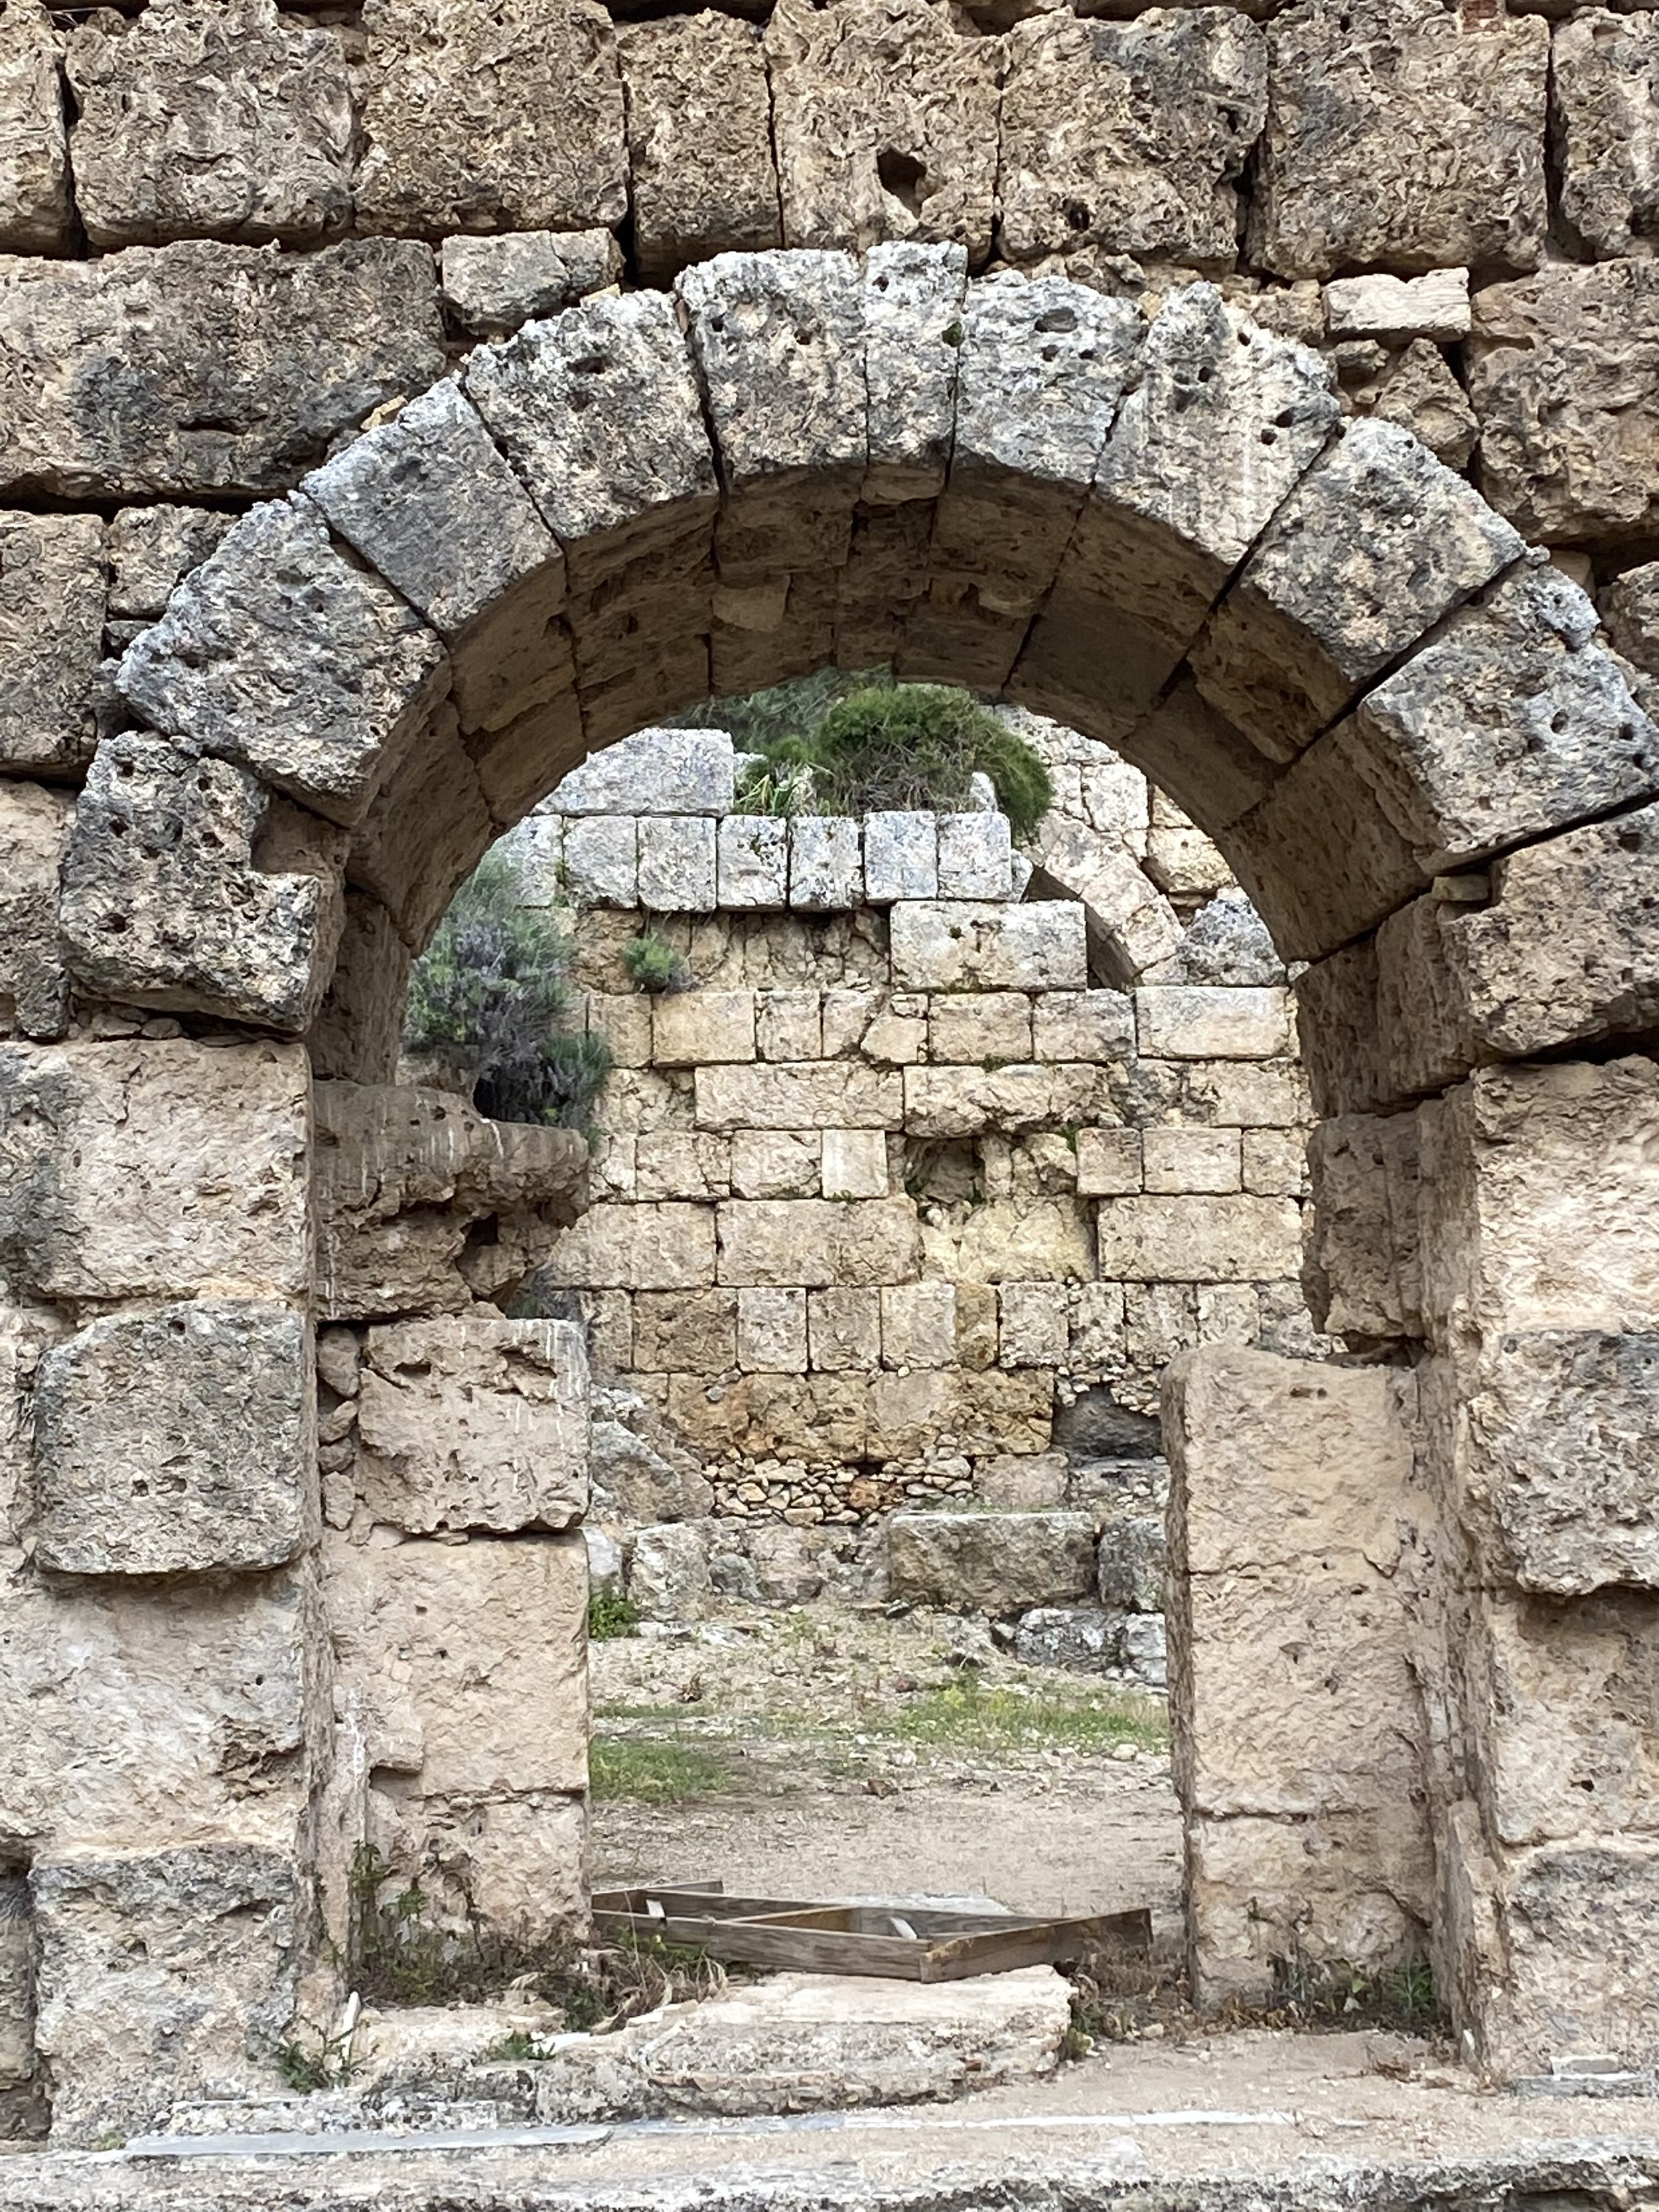 Ruins of the important city of Perga, where Paul began his first missionary journey.